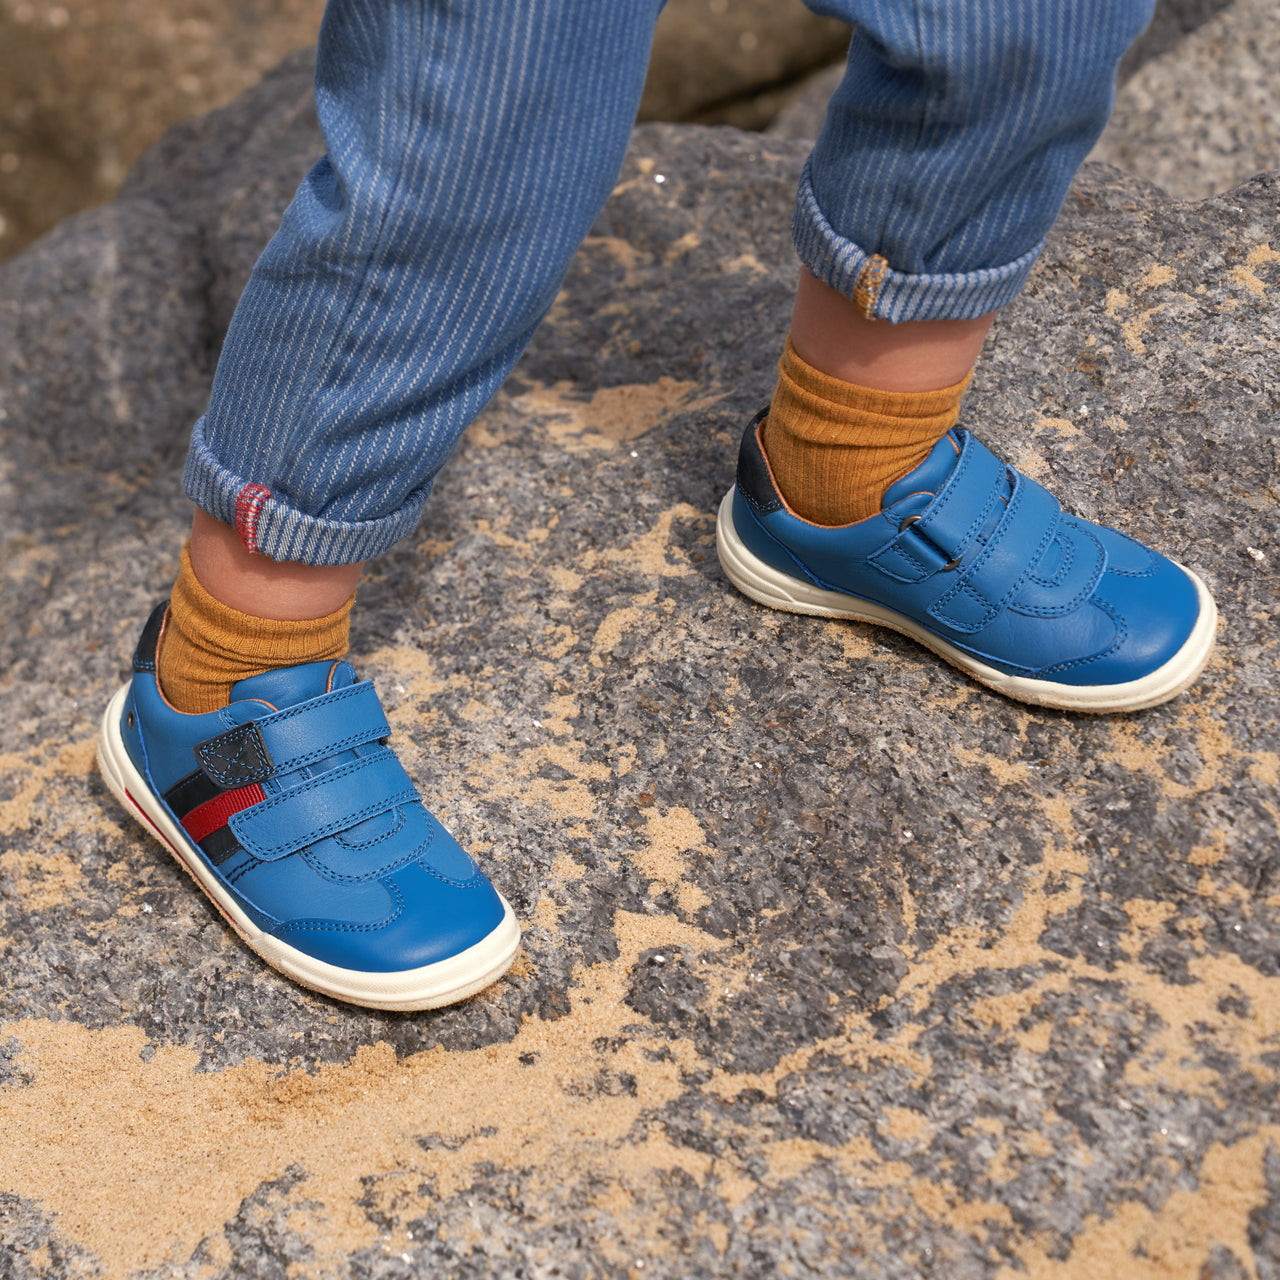 A child wearing a pair of boys casual shoes by Start Rite, style Seesaw, in blue and red leather with double velcro fastening Angled view.